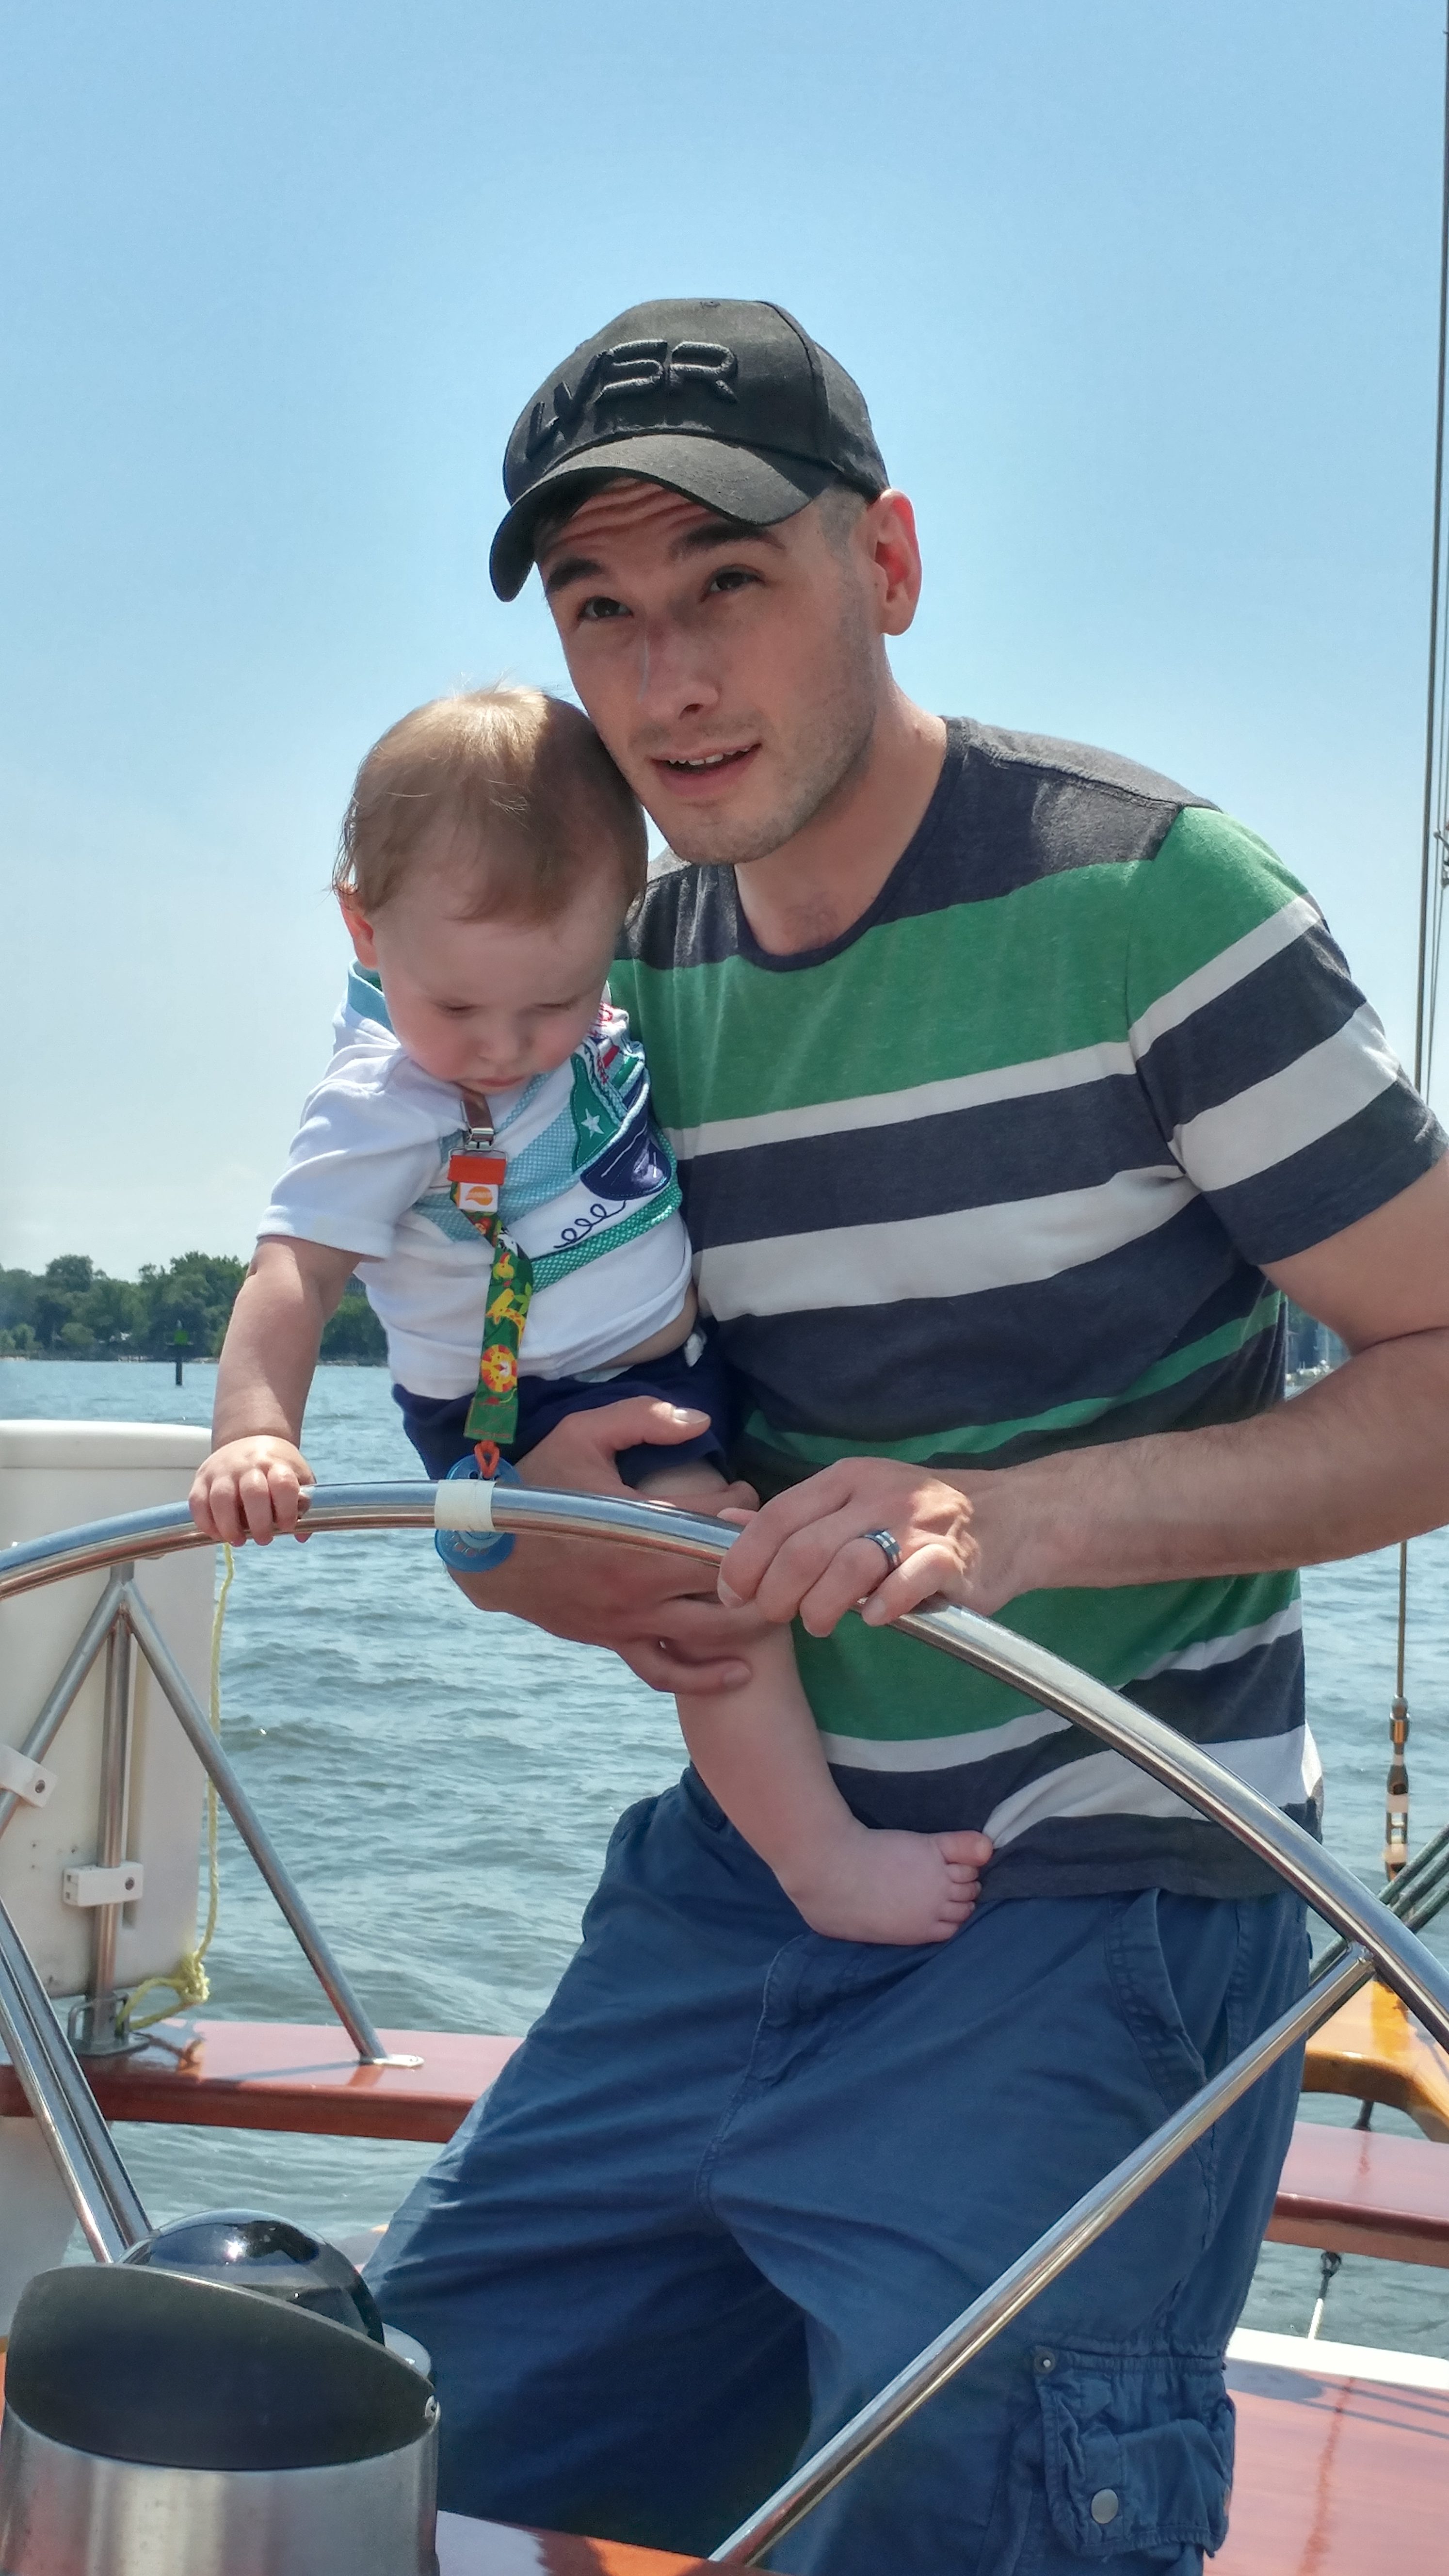 Man and baby steering boat